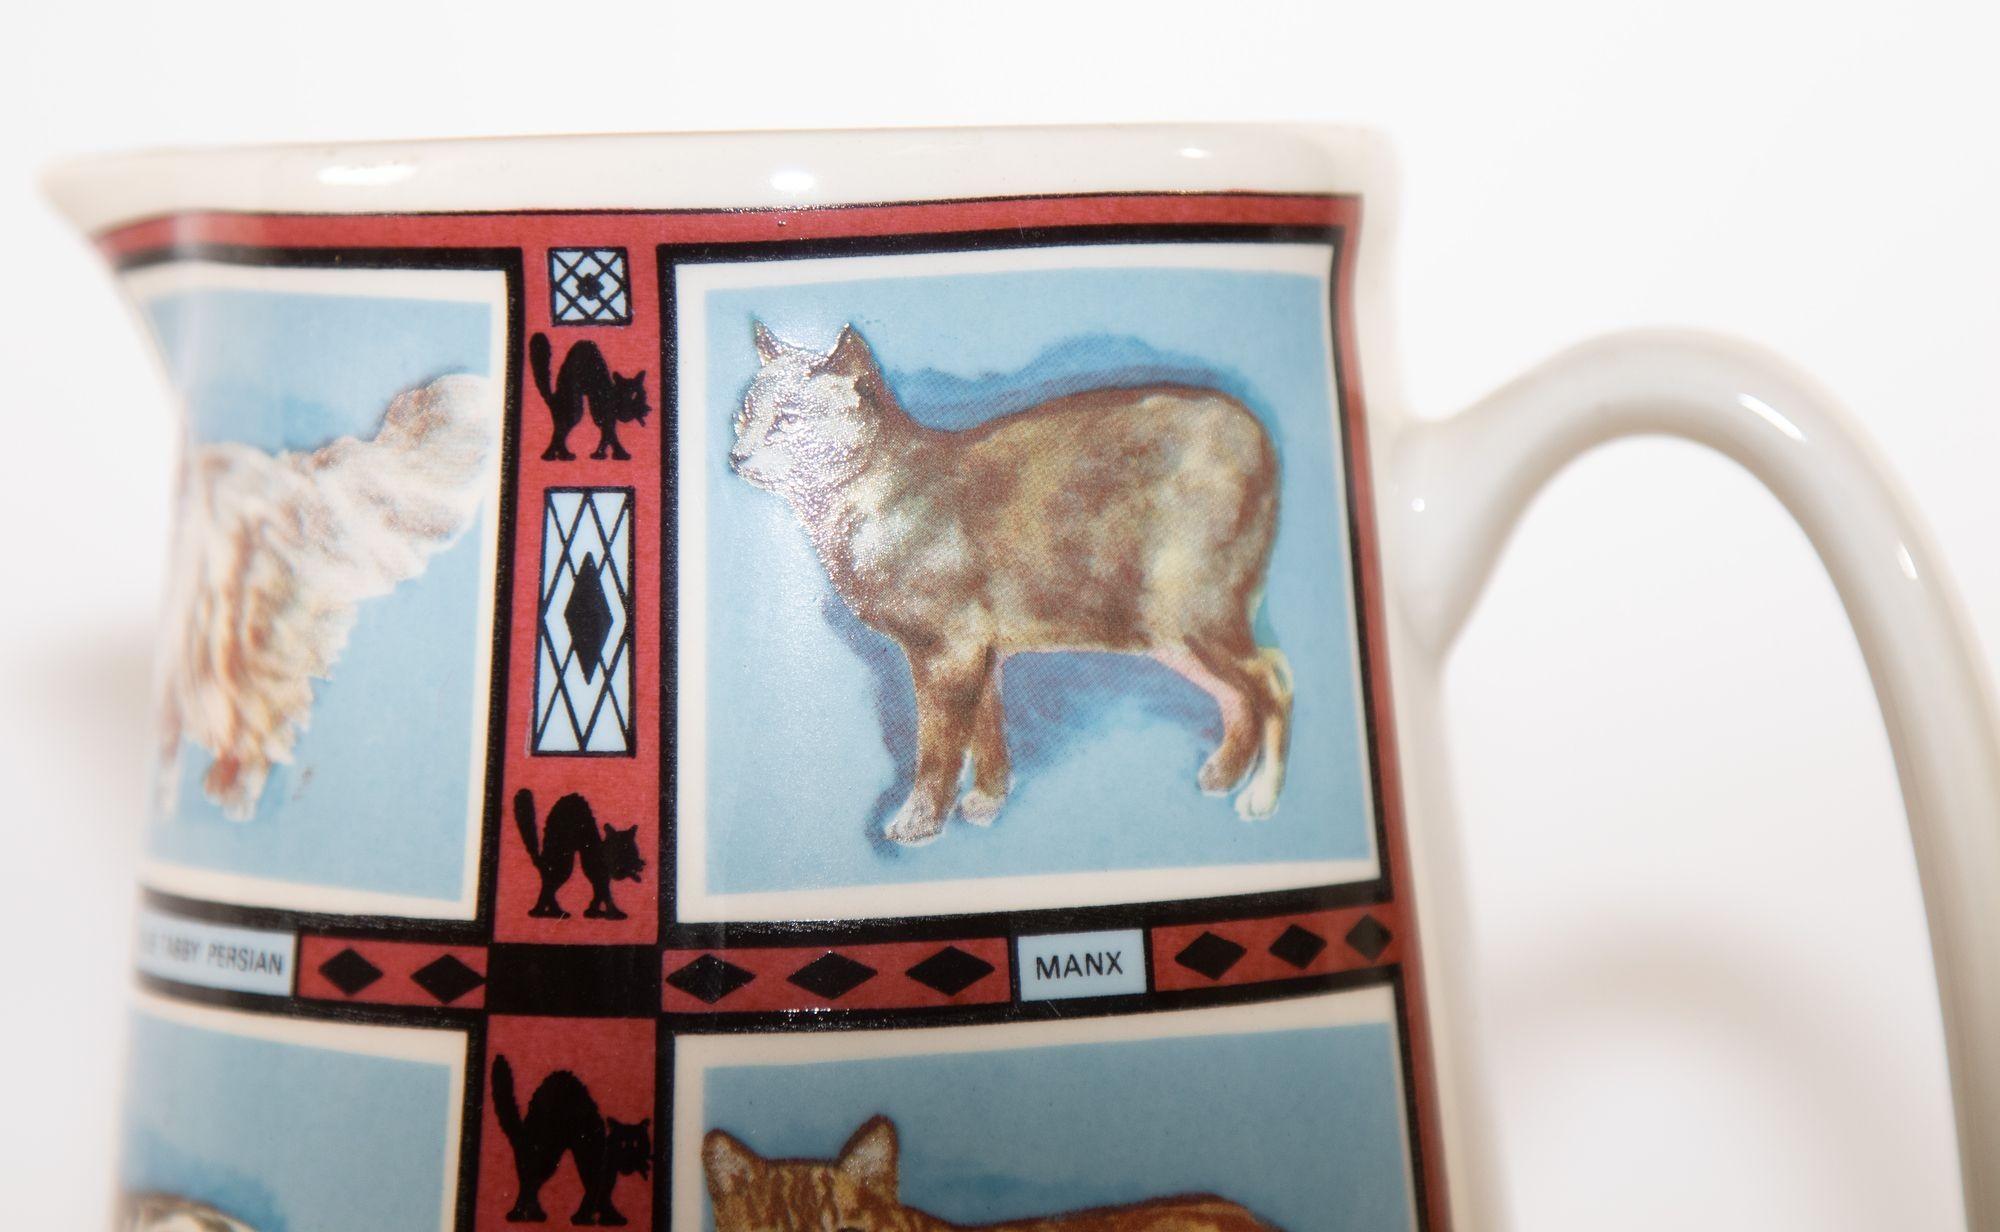 English Vintage 1970s Ceramic Pitcher, Derbyshire England with Cat Breeds Pictures